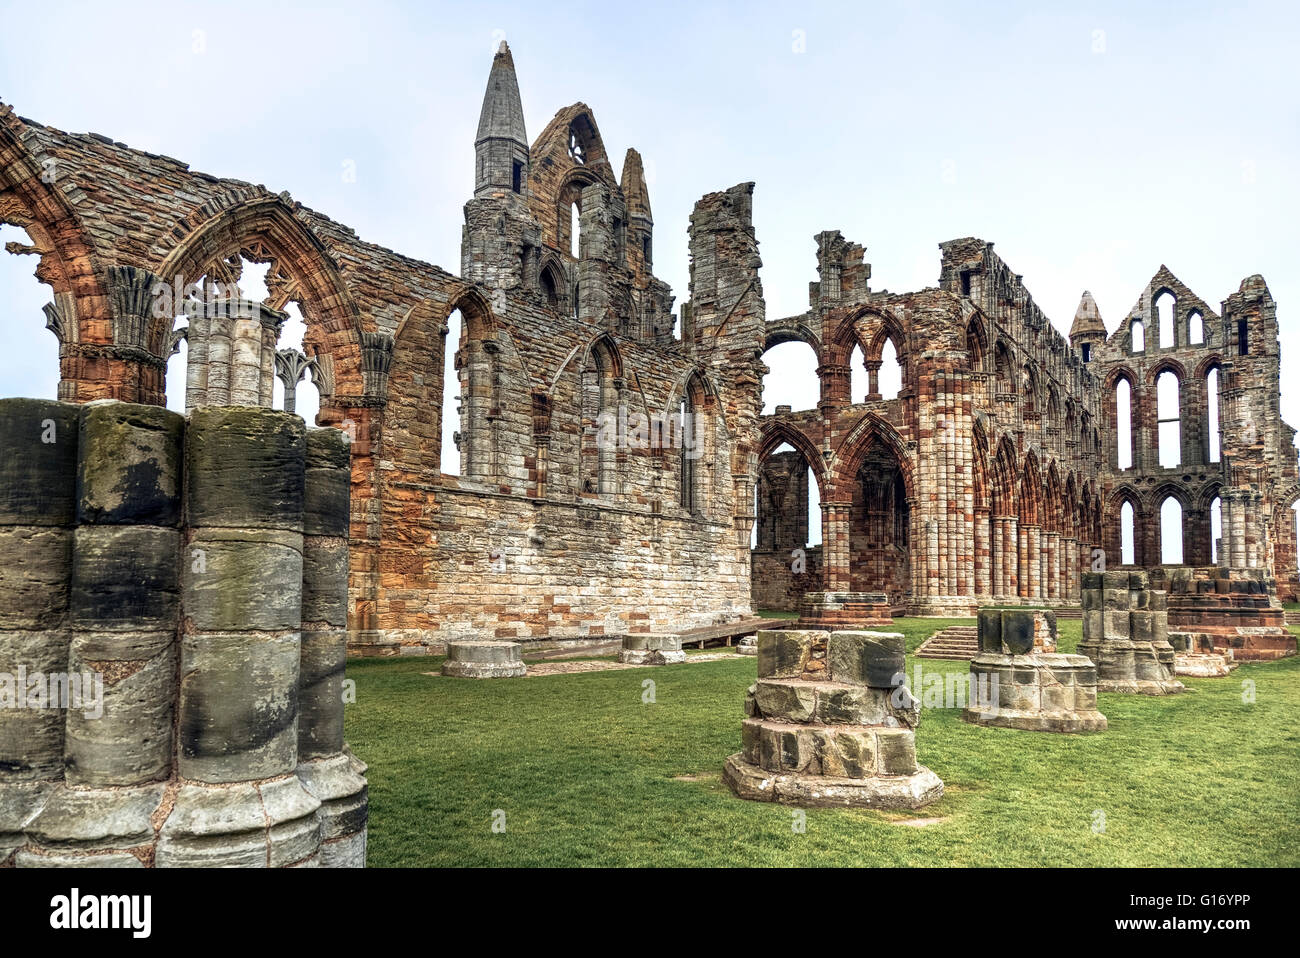 Whitby Abbey, Scarborough, North Yorkshire, England, UK Banque D'Images